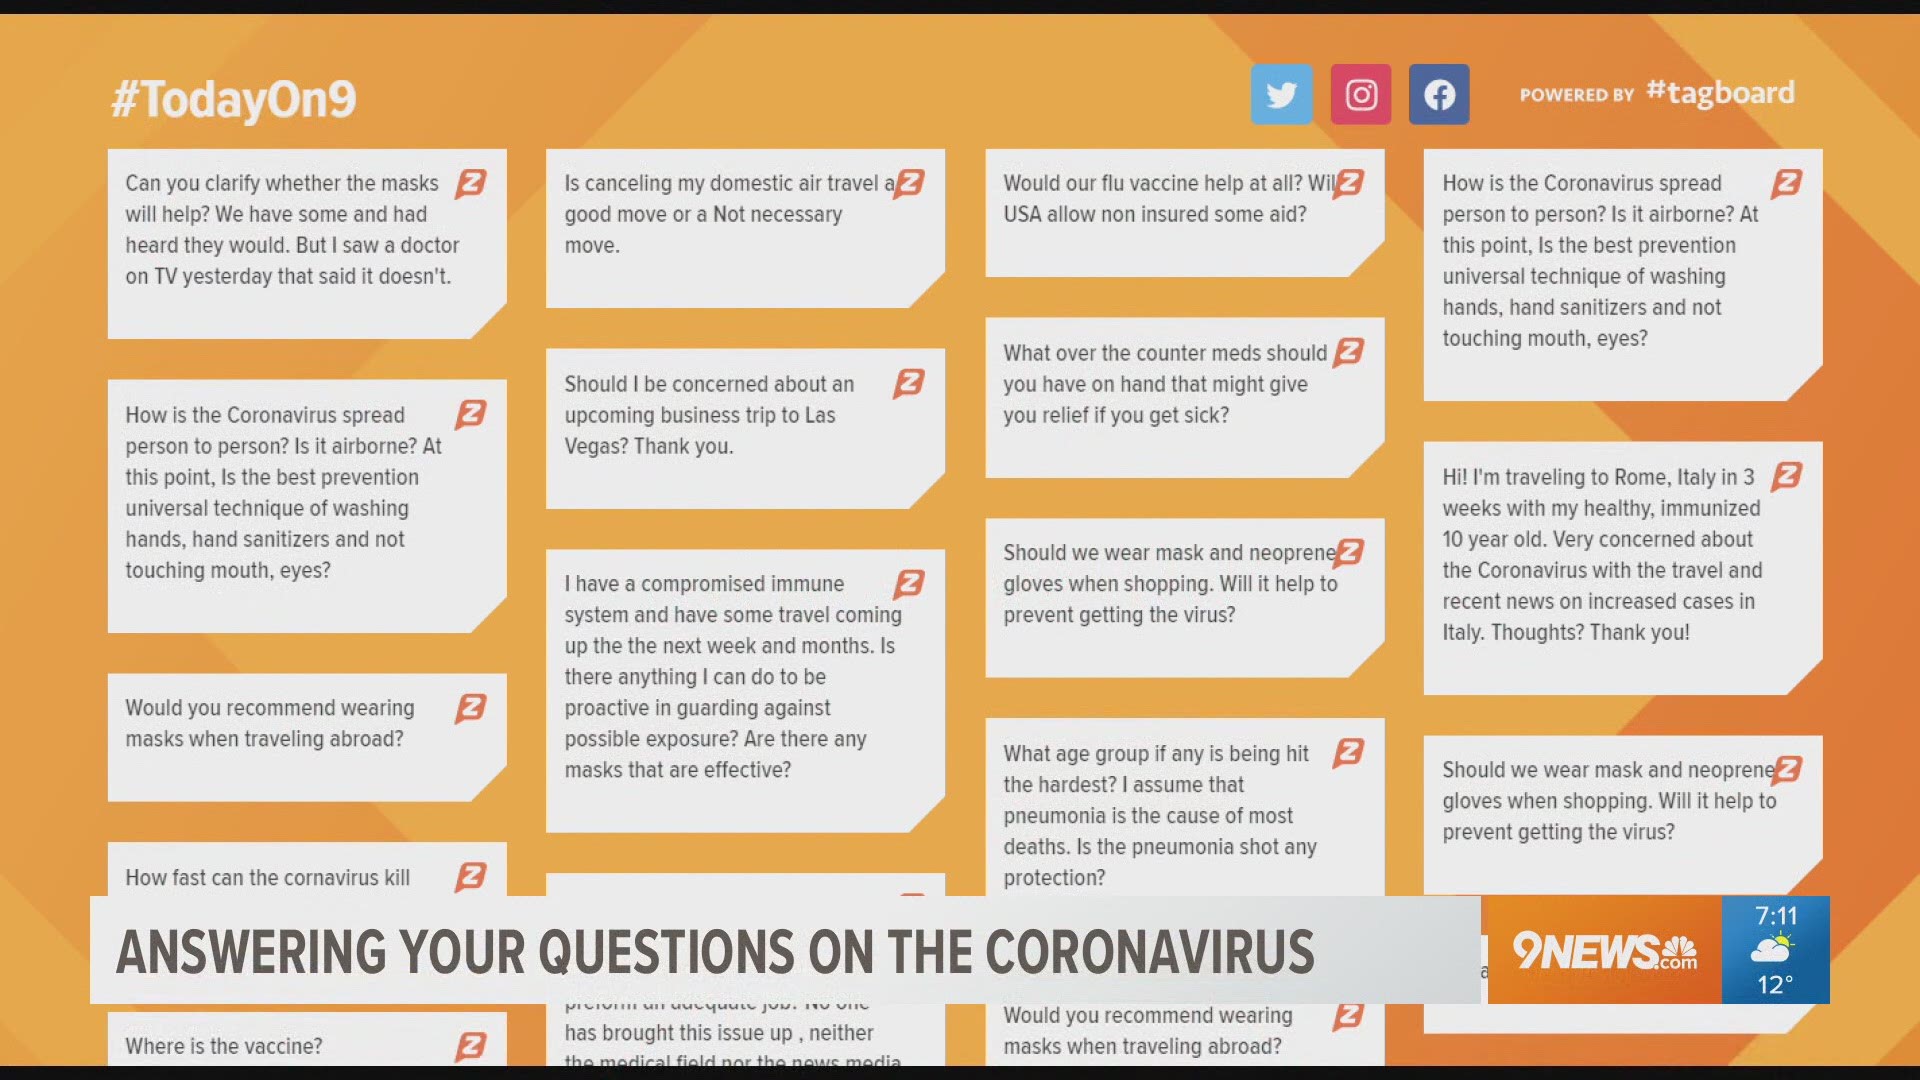 Dr. Michelle Barron, the director of infection control and prevention at UCHealth, answers your questions about the coronavirus.